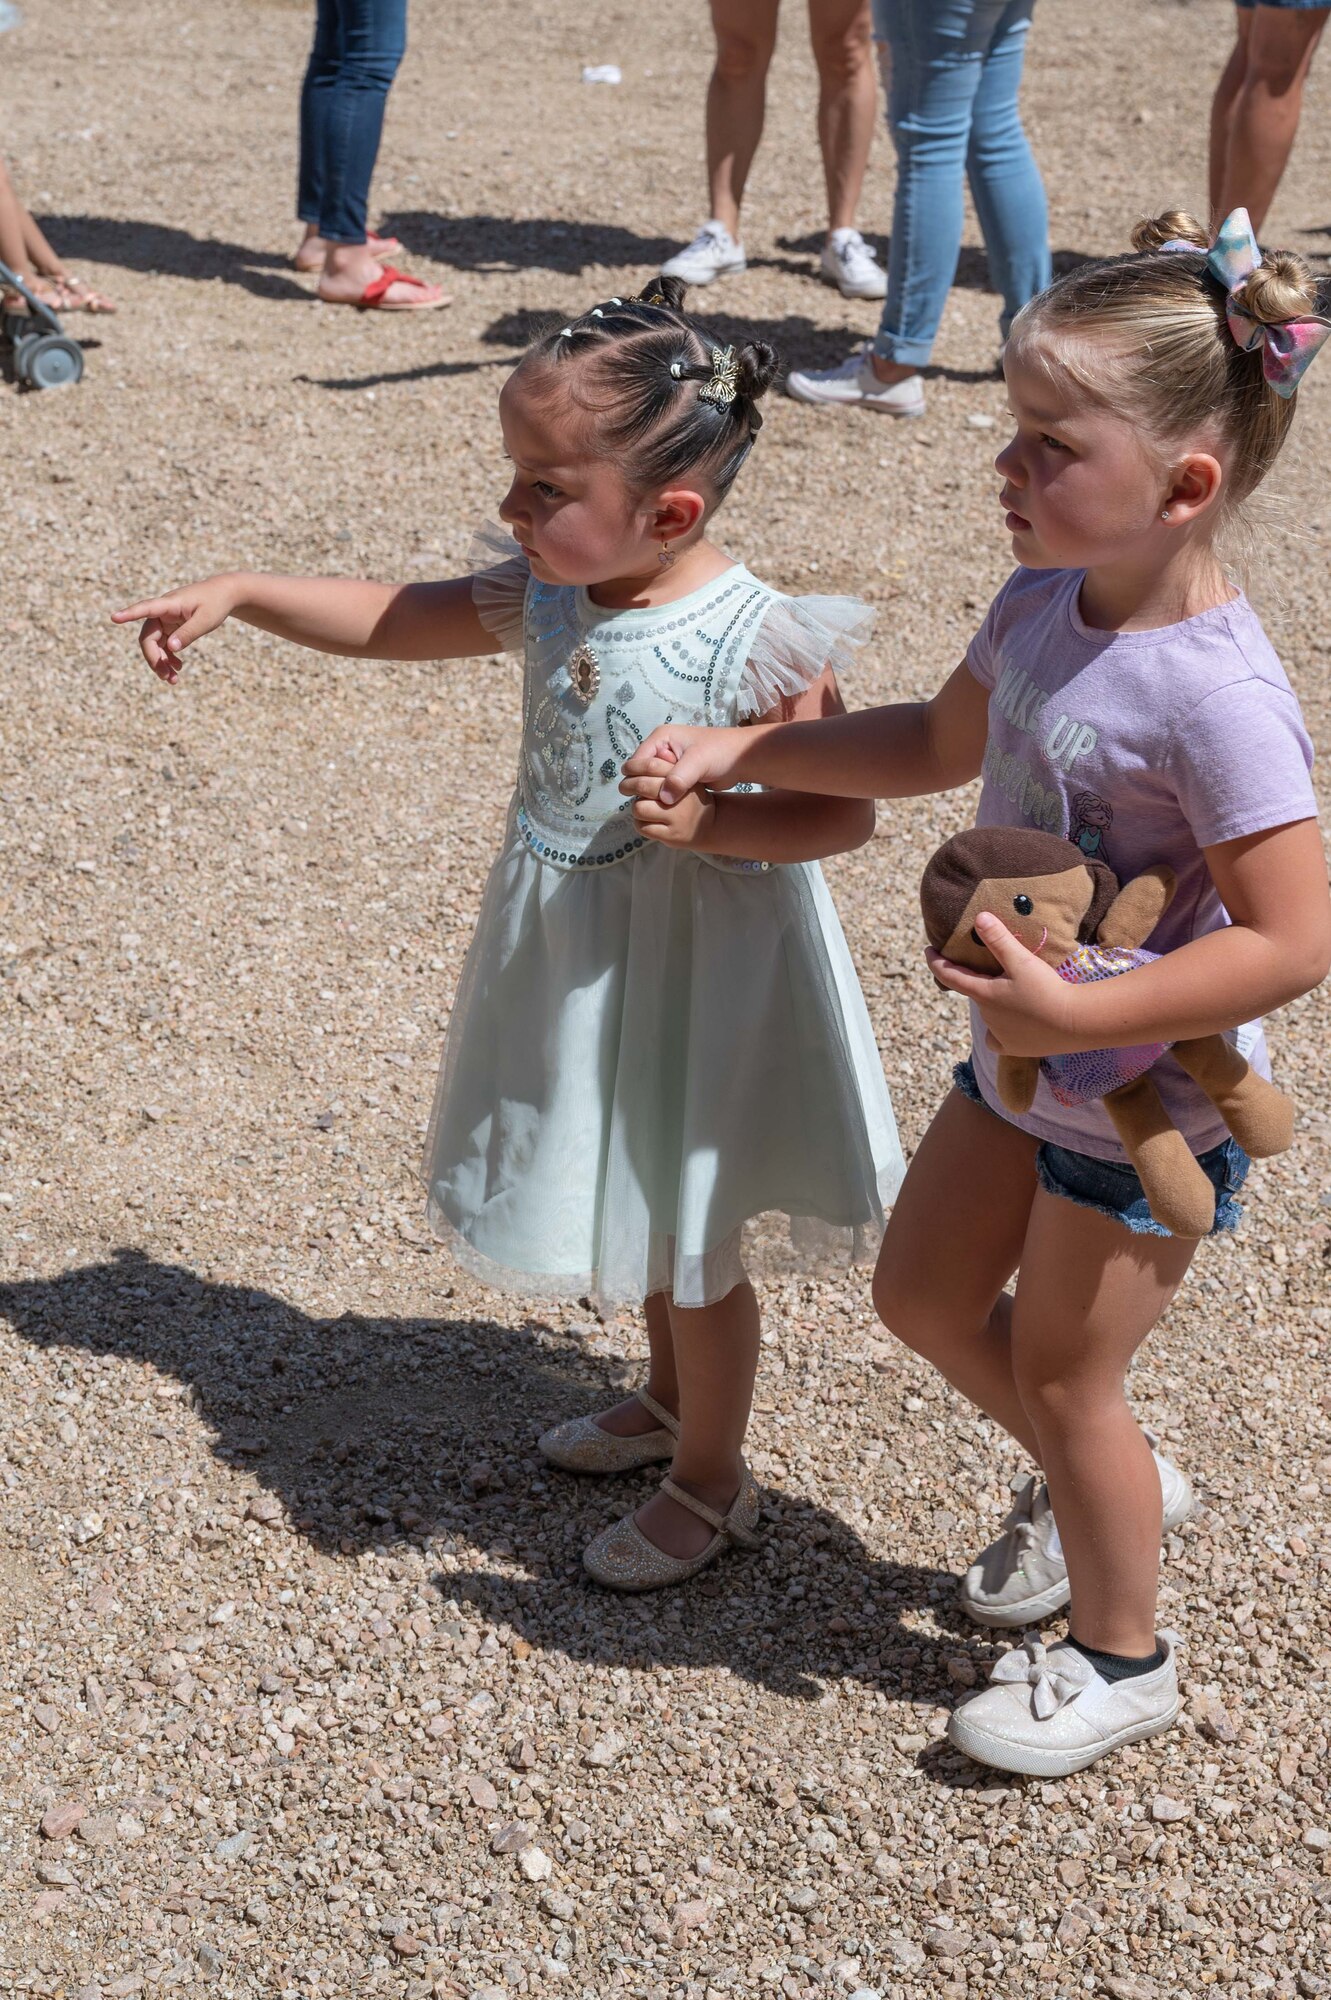 Airmen from the 162nd Wing enjoy time with their families during the 2022 Wing Family Day festivities held Pima Community College’s Desert Vista Campus on April 3.